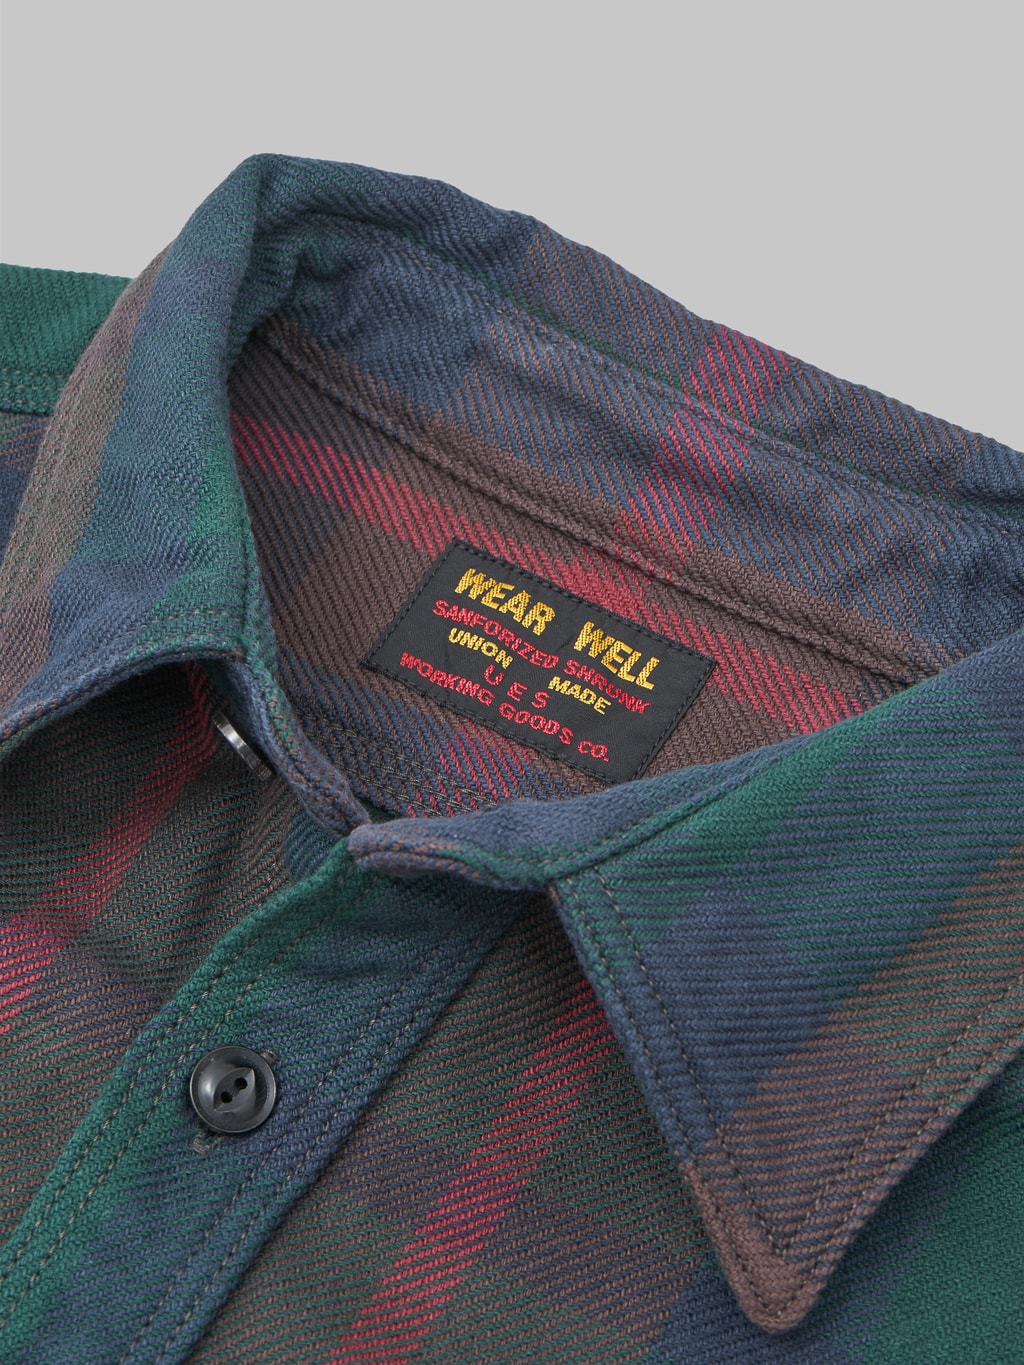 UES Extra Heavy Flannel Shirt green interior tag